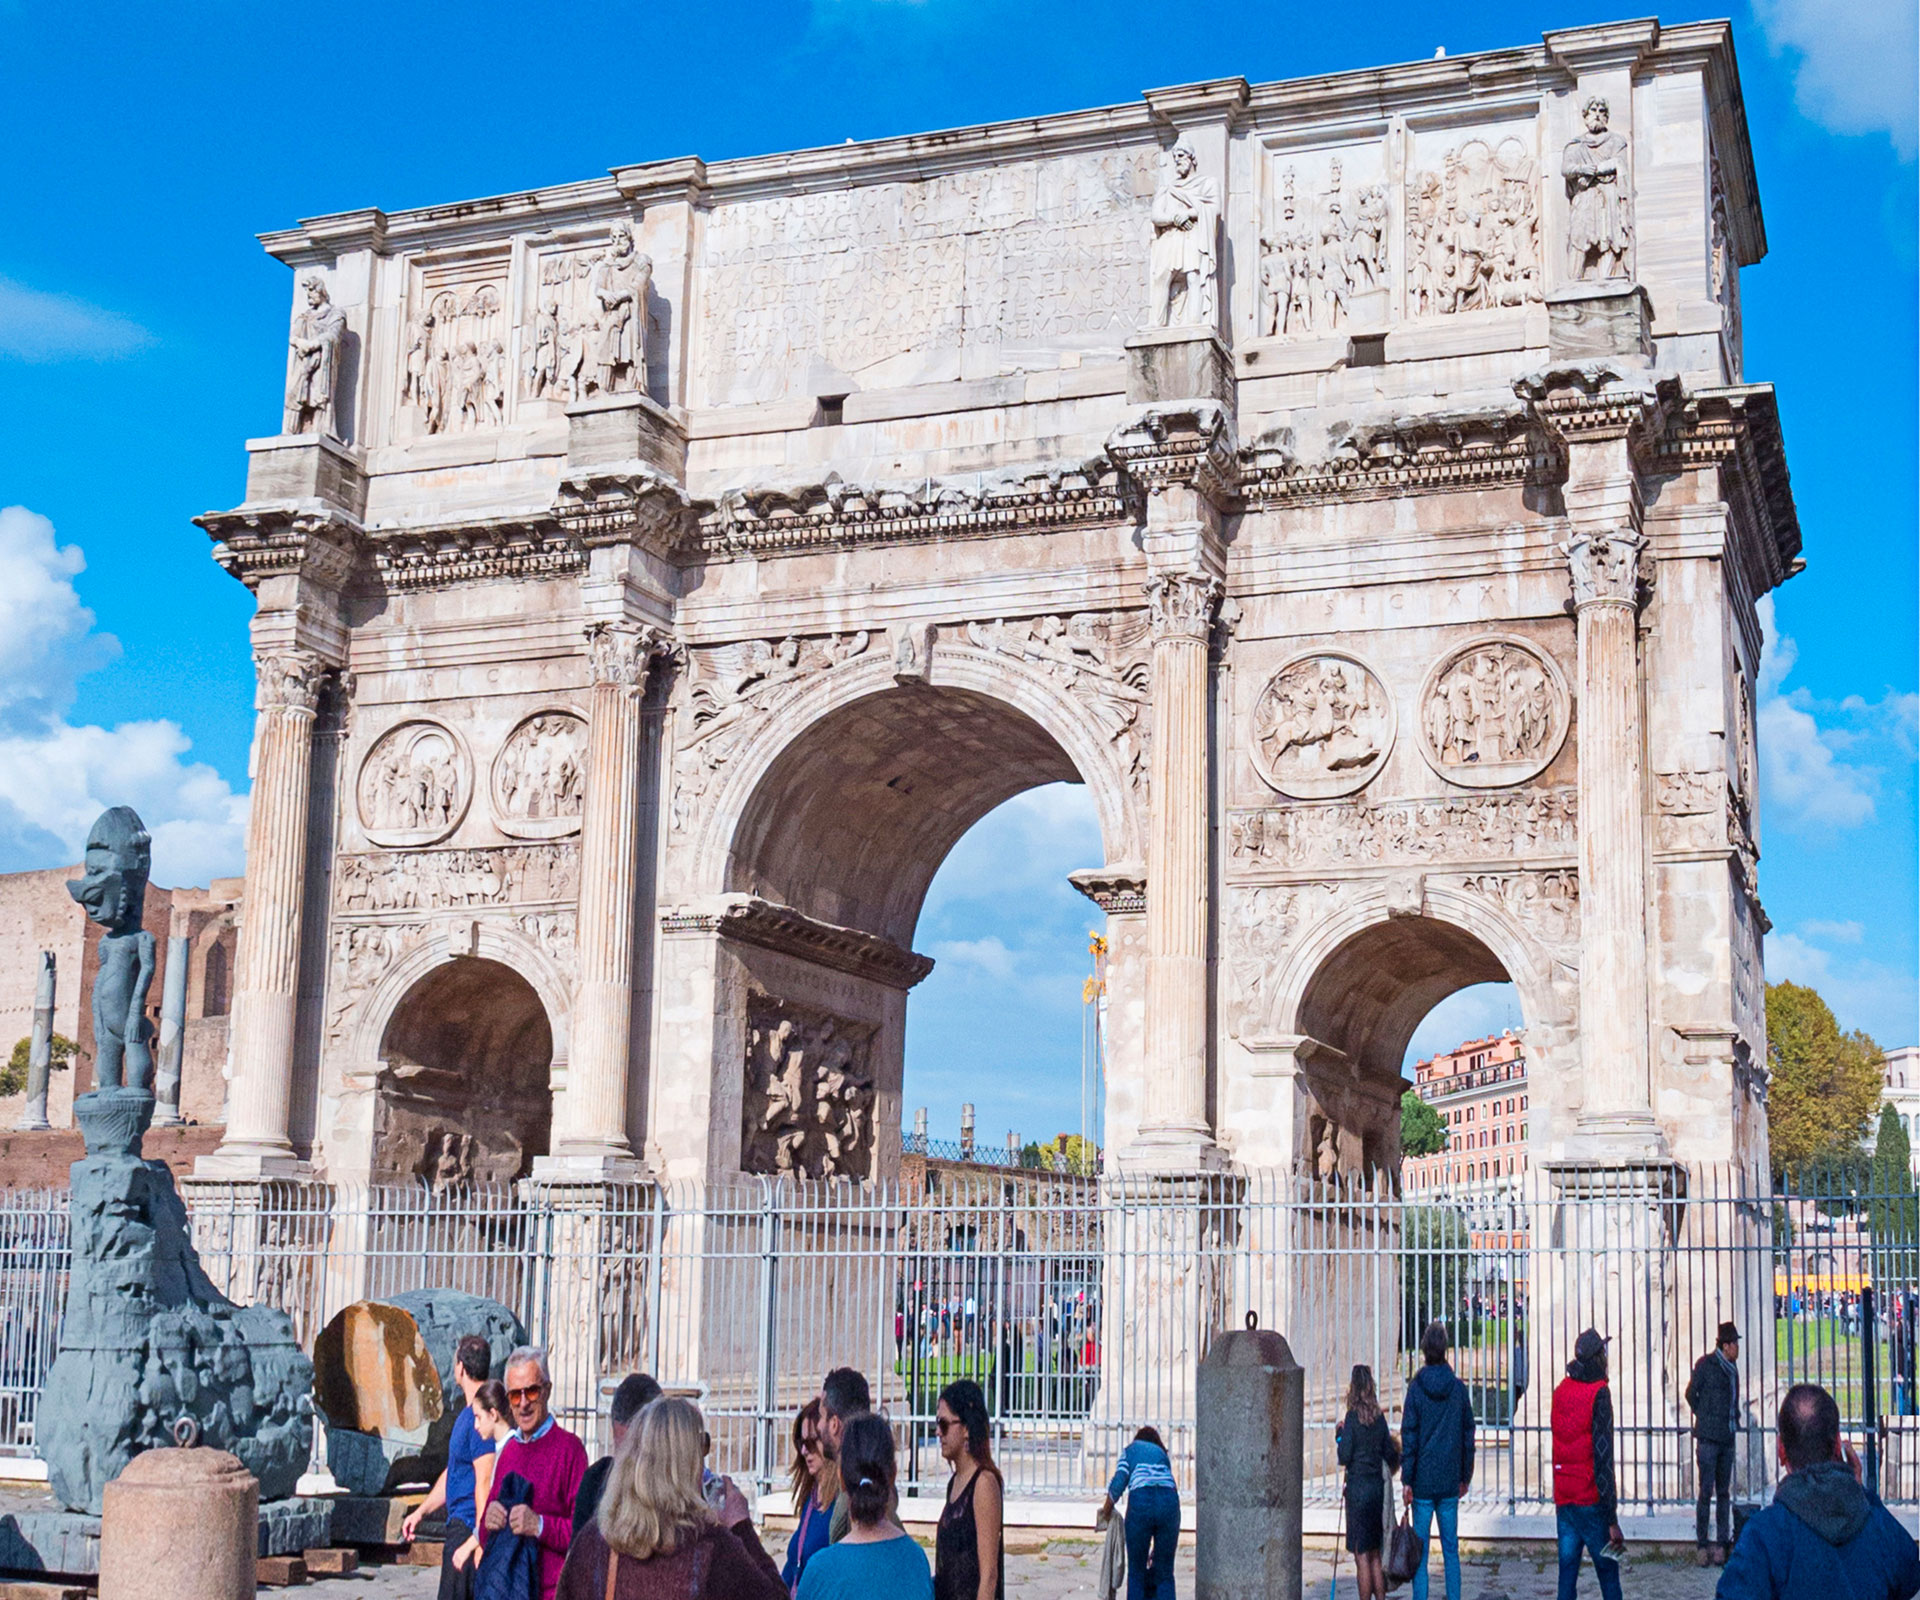 The Arch of Constantine was  built in 315 AD and is situated next to  the Colosseum.